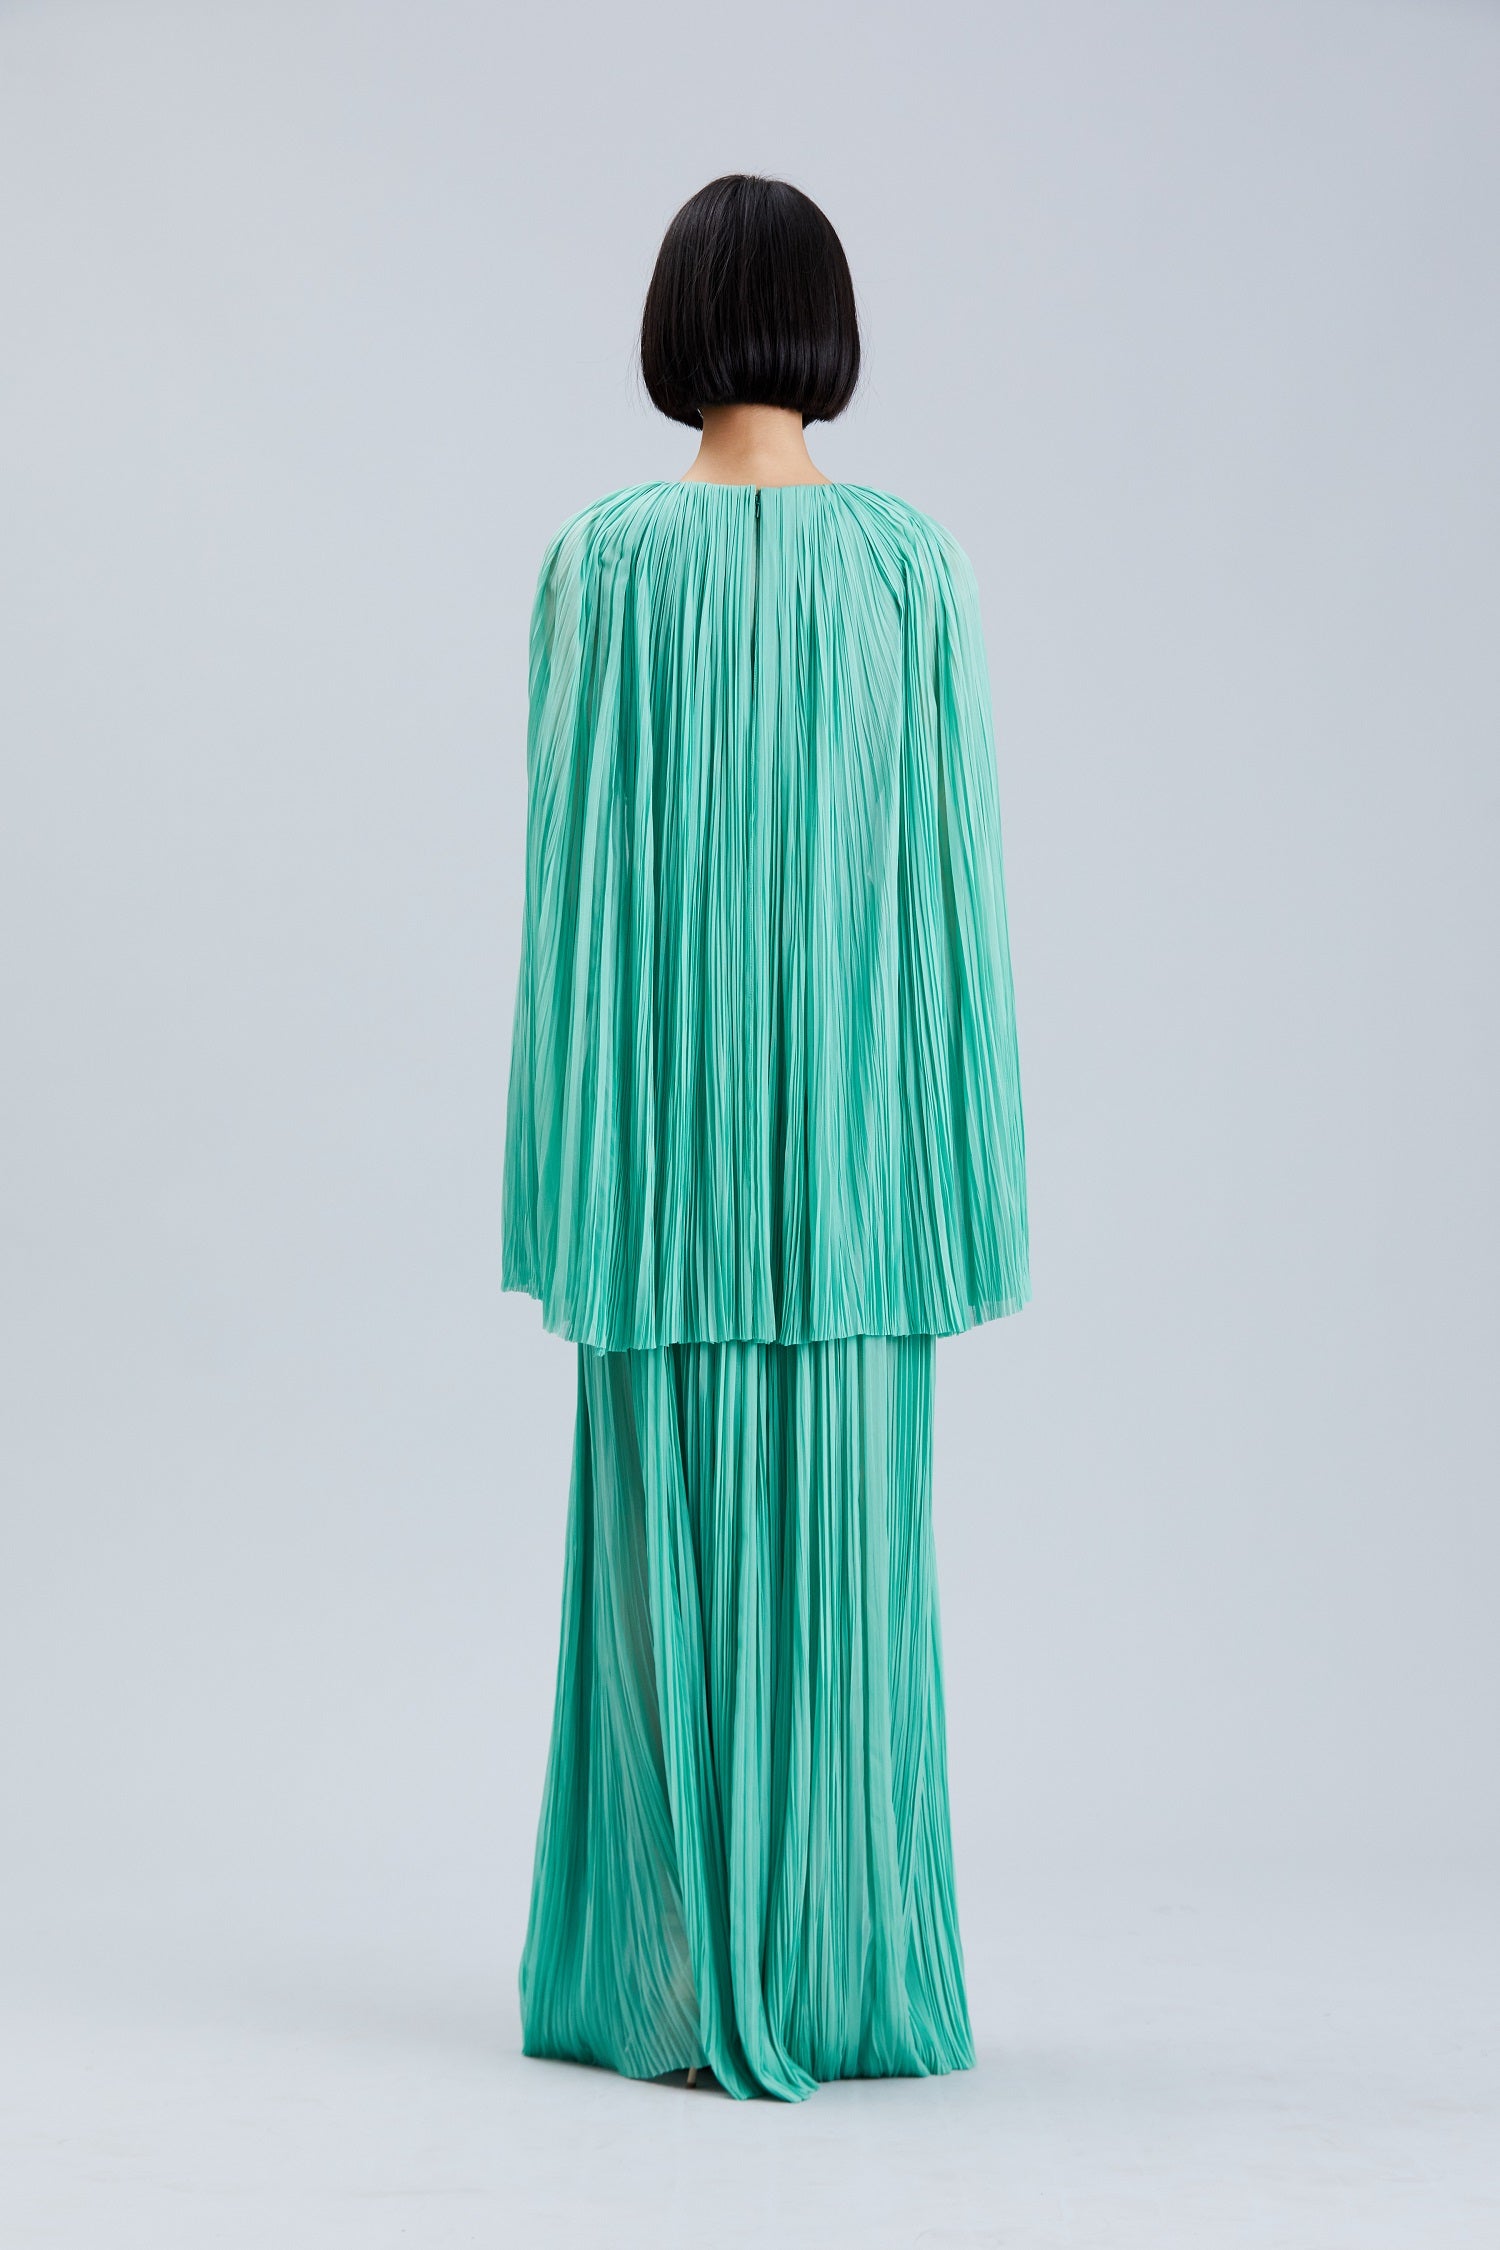 SEA FORM GREEN V NECK SILK HAND PLEATING  GOWN